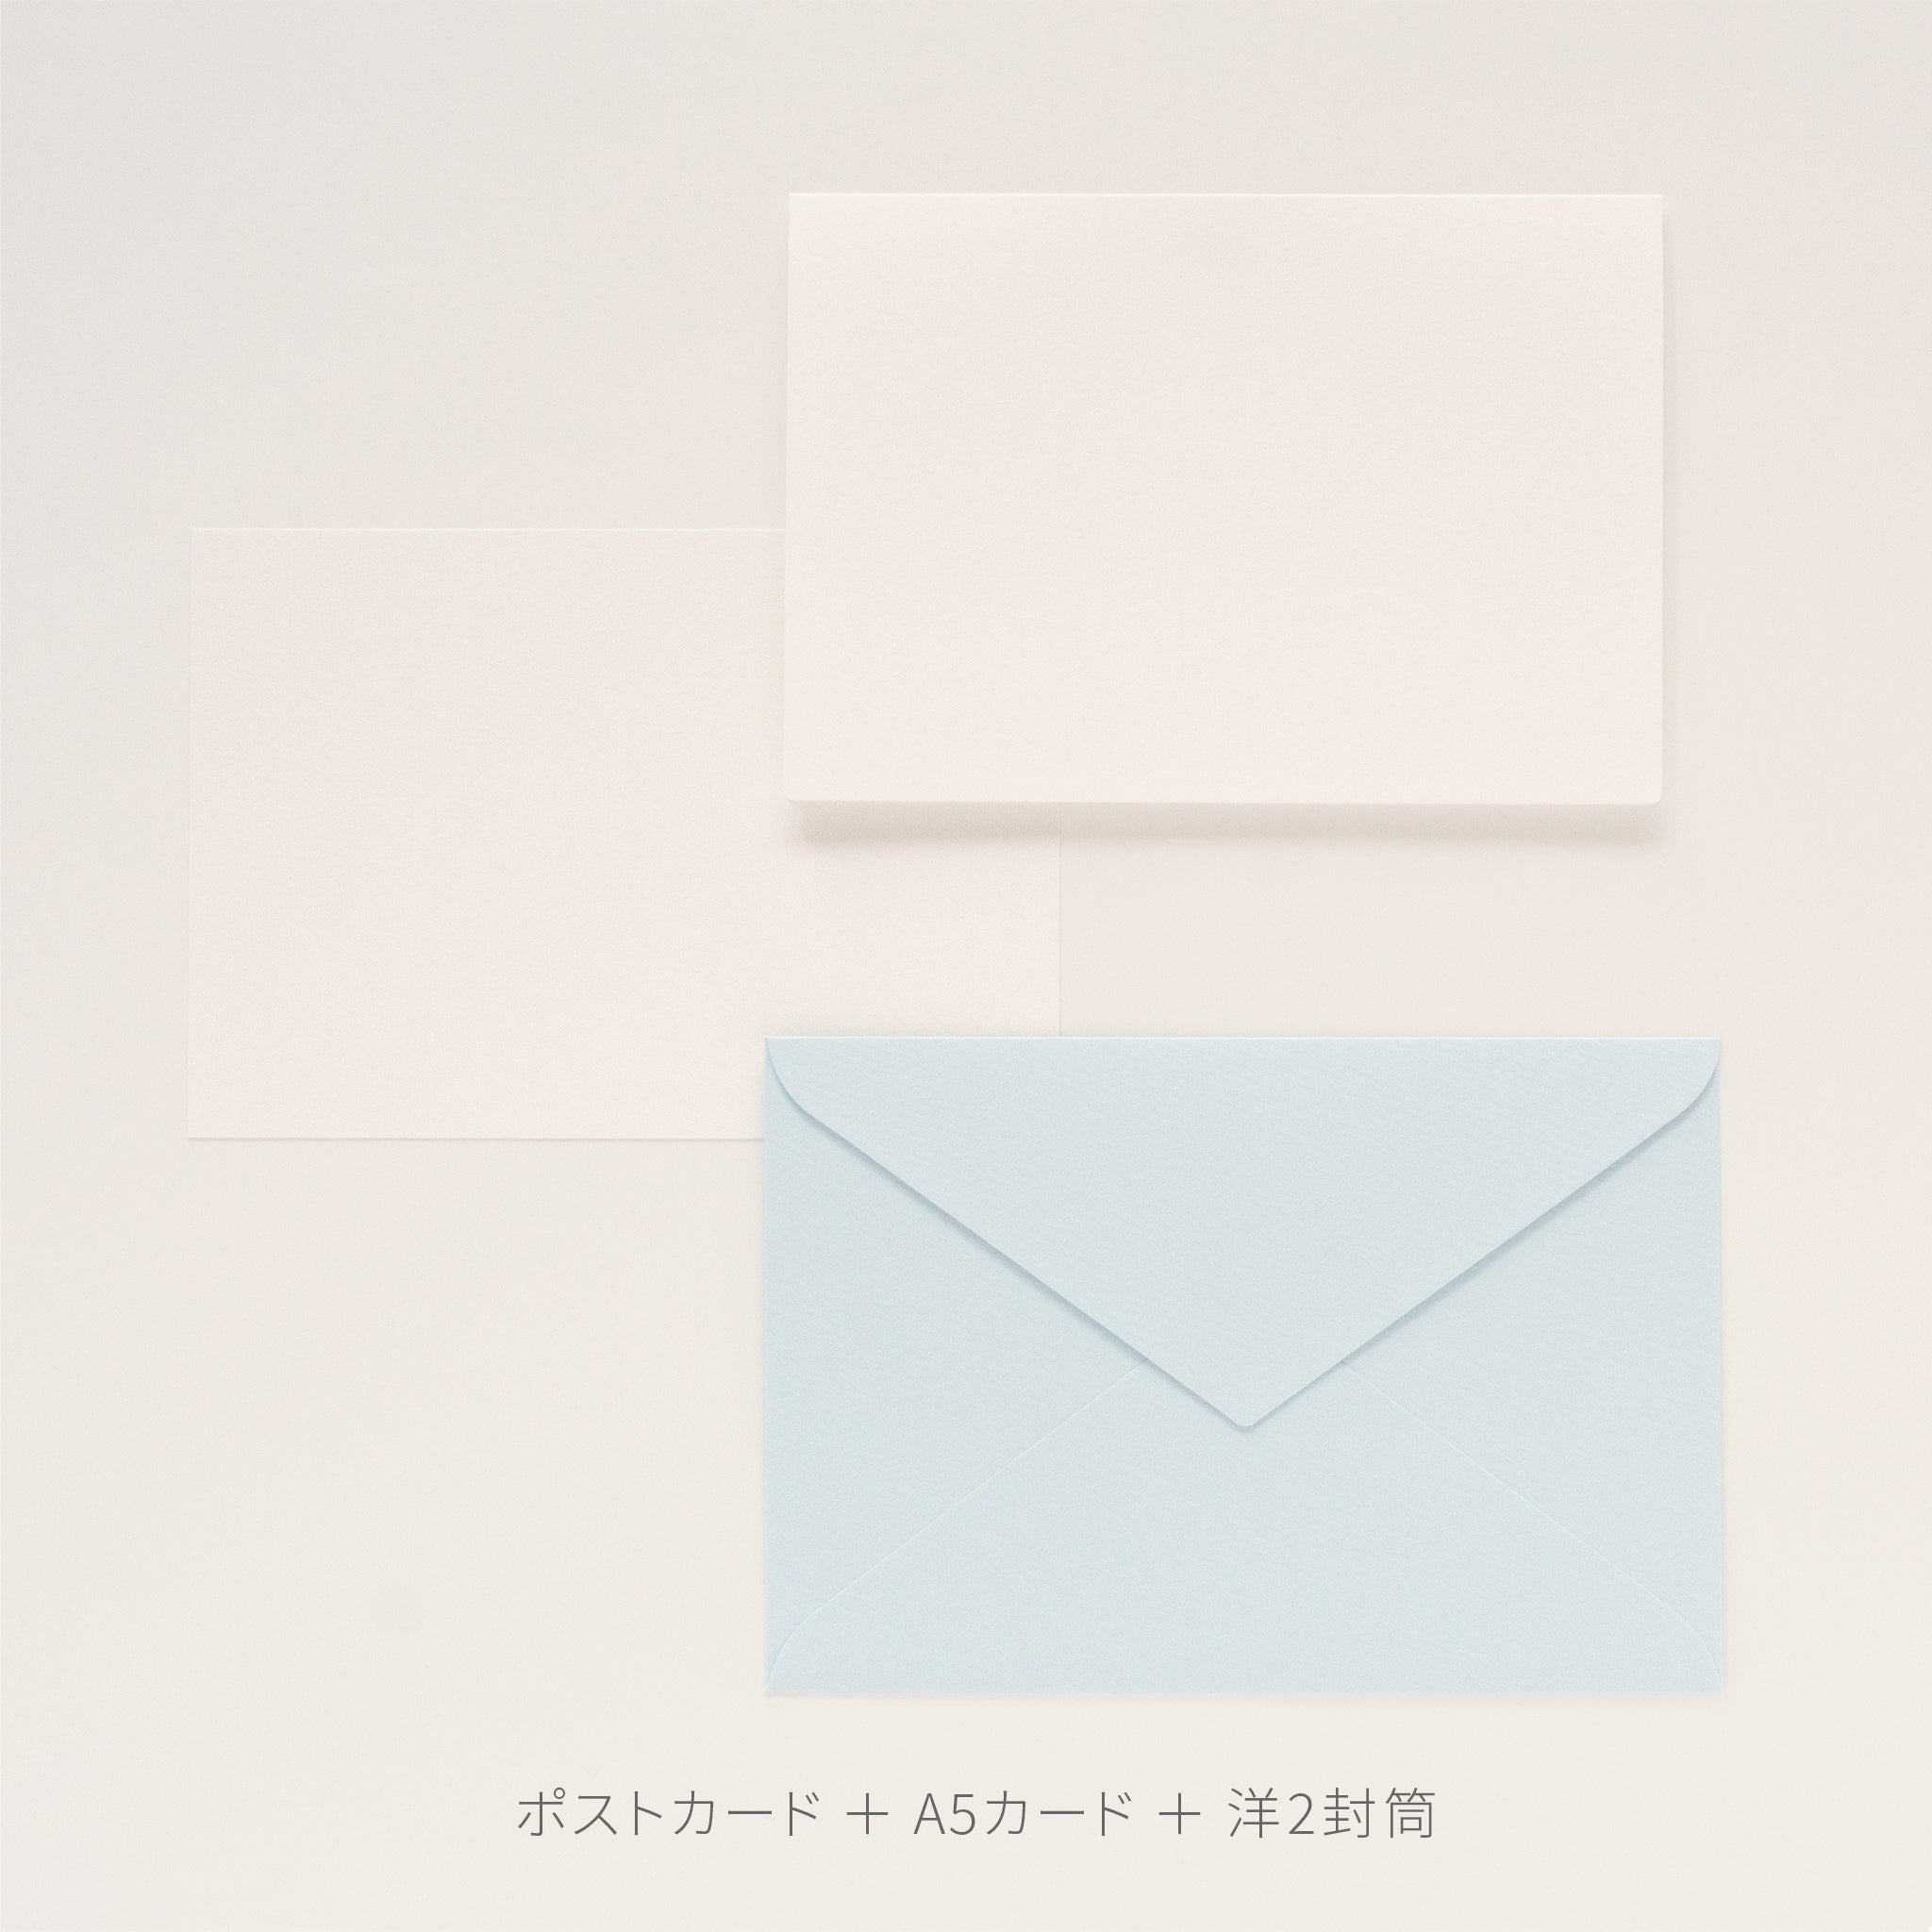 PAPER PALETTE 洋2封筒 クラシコトレーシング – products.takeopaper.com